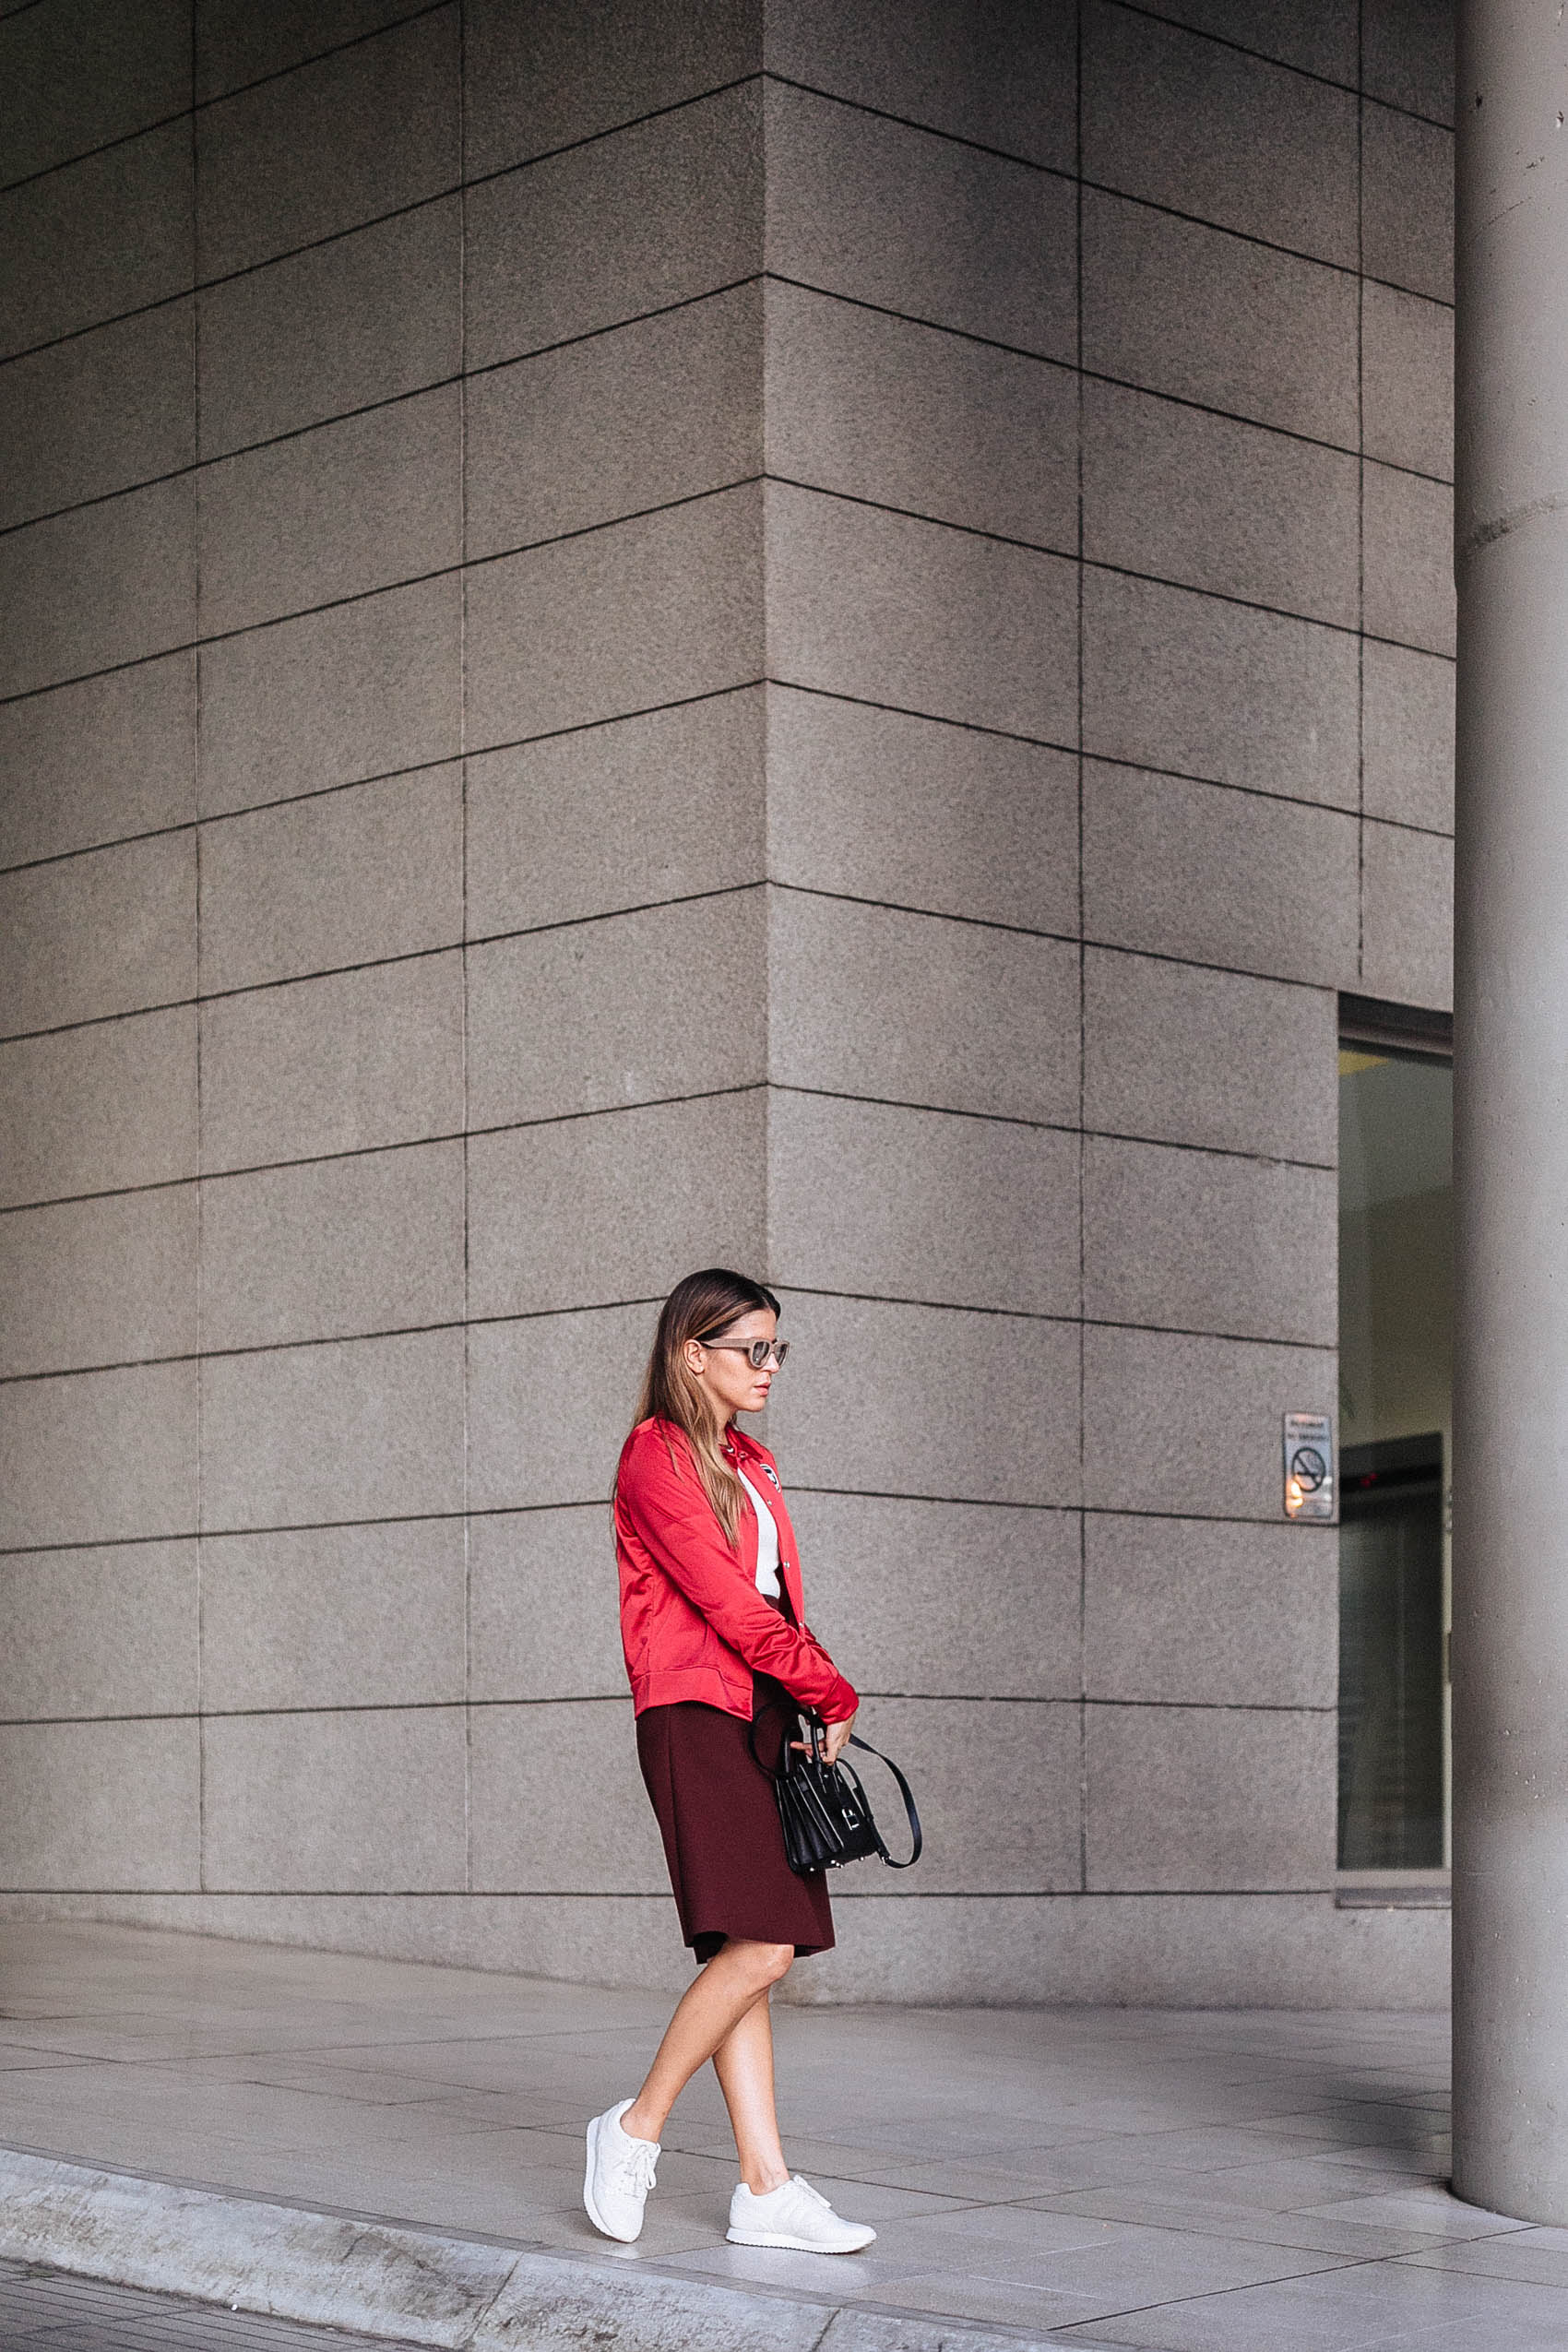 Blogger Maristella Gonzalez wearing a red bomber jacket, skirt and sneaker outfit